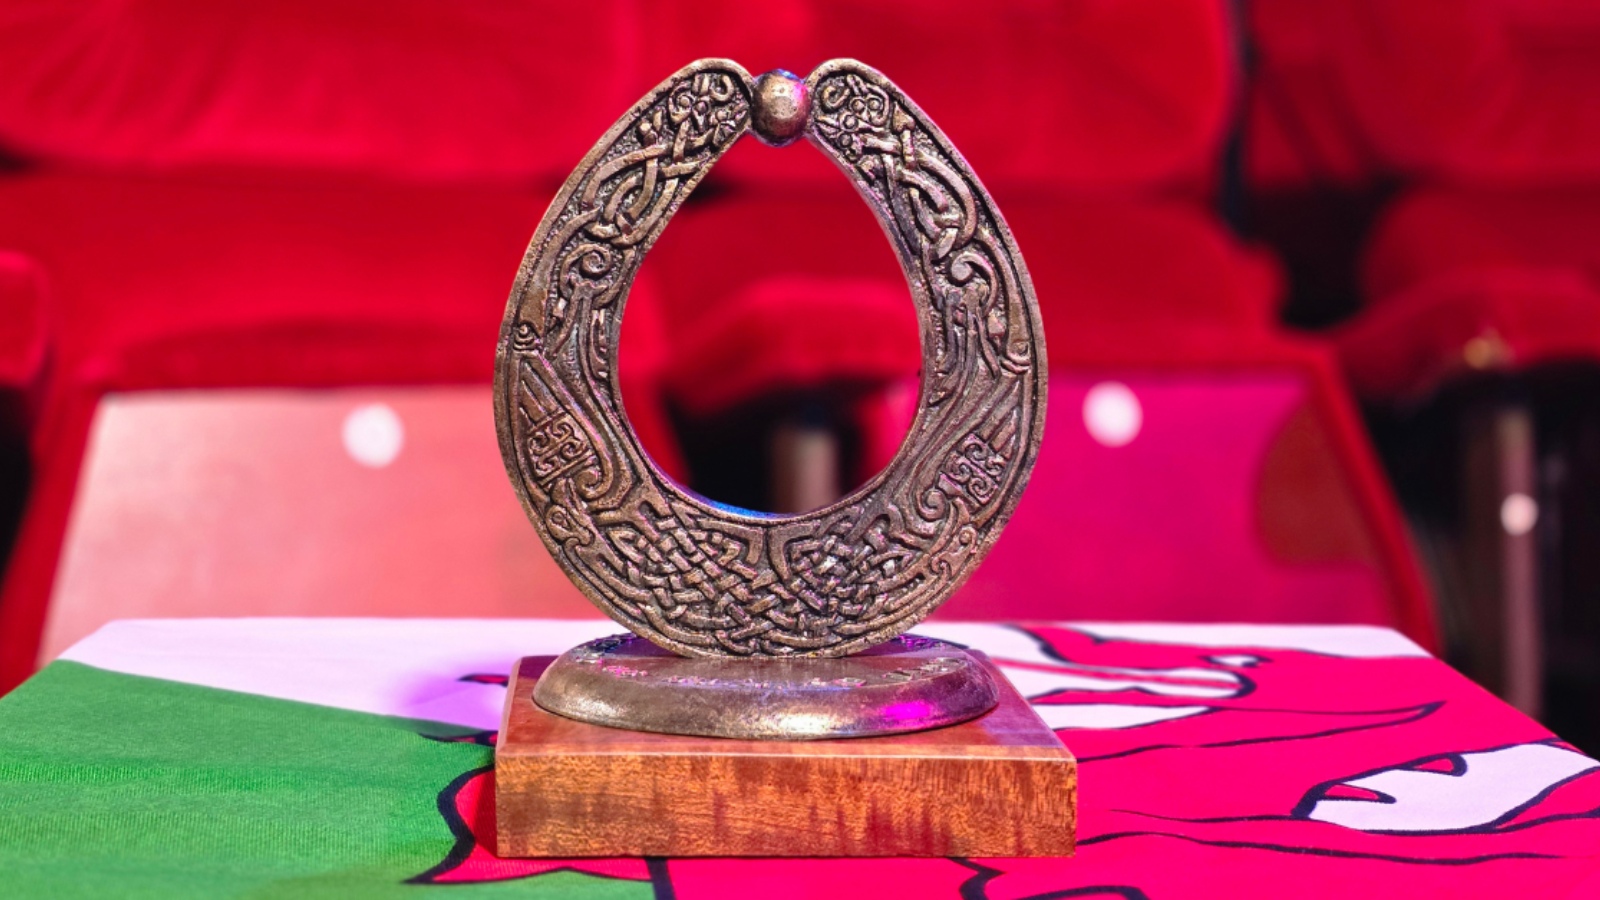 The Celtic Media Festival torc trophy sits on a table